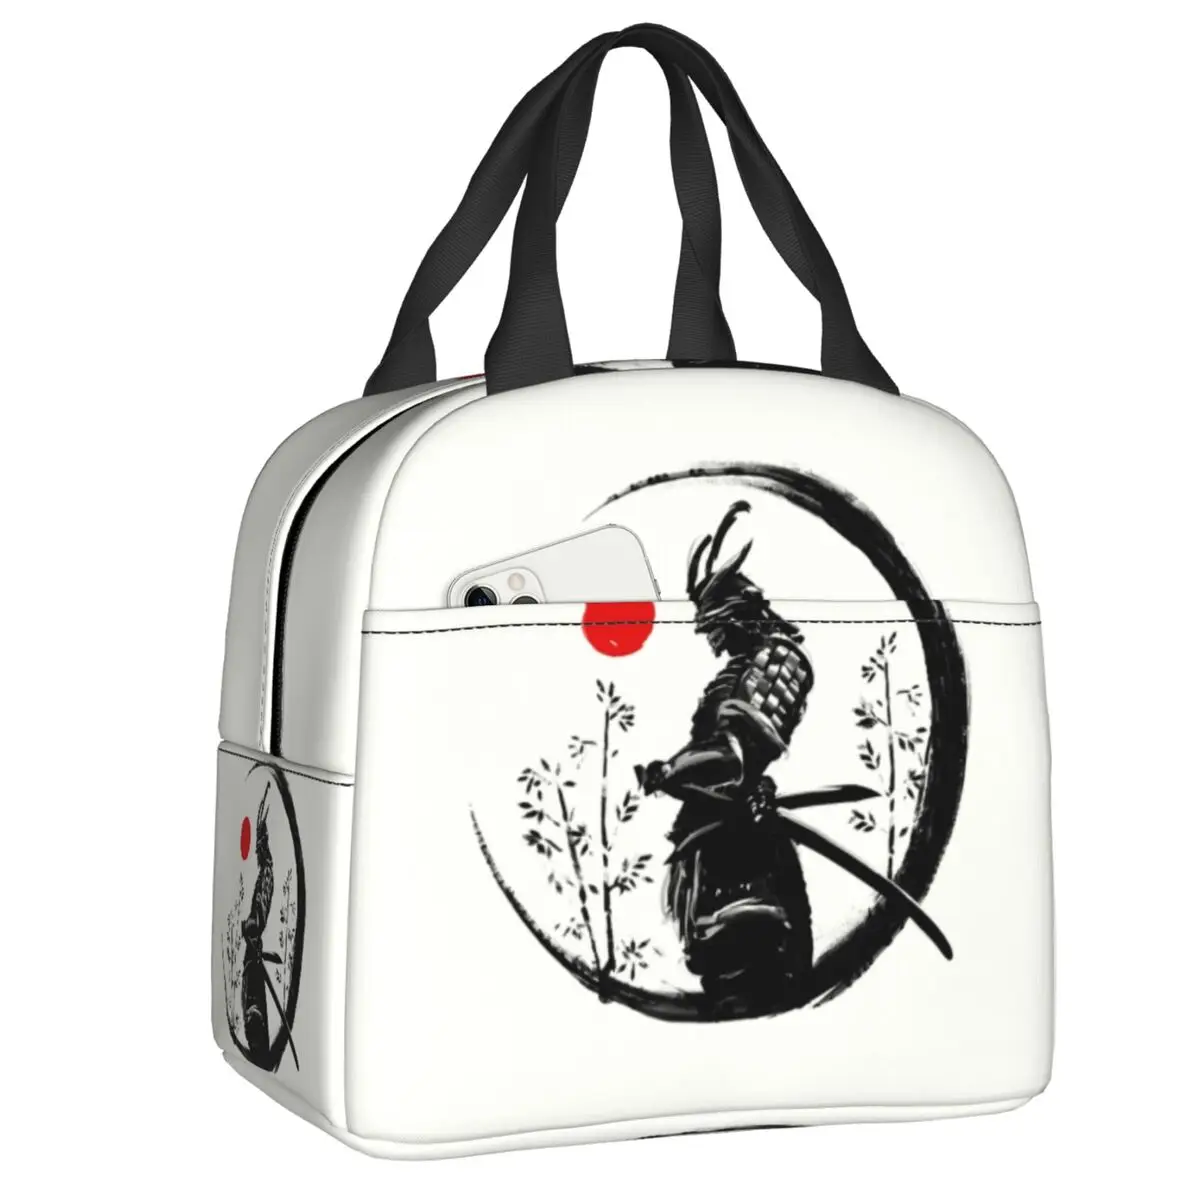 

Japanese Samurai Warrior Lunch Bag Leakproof Cooler Thermal Insulated Bento Box For Women Kids Work Picnic Travel Food Tote Bags